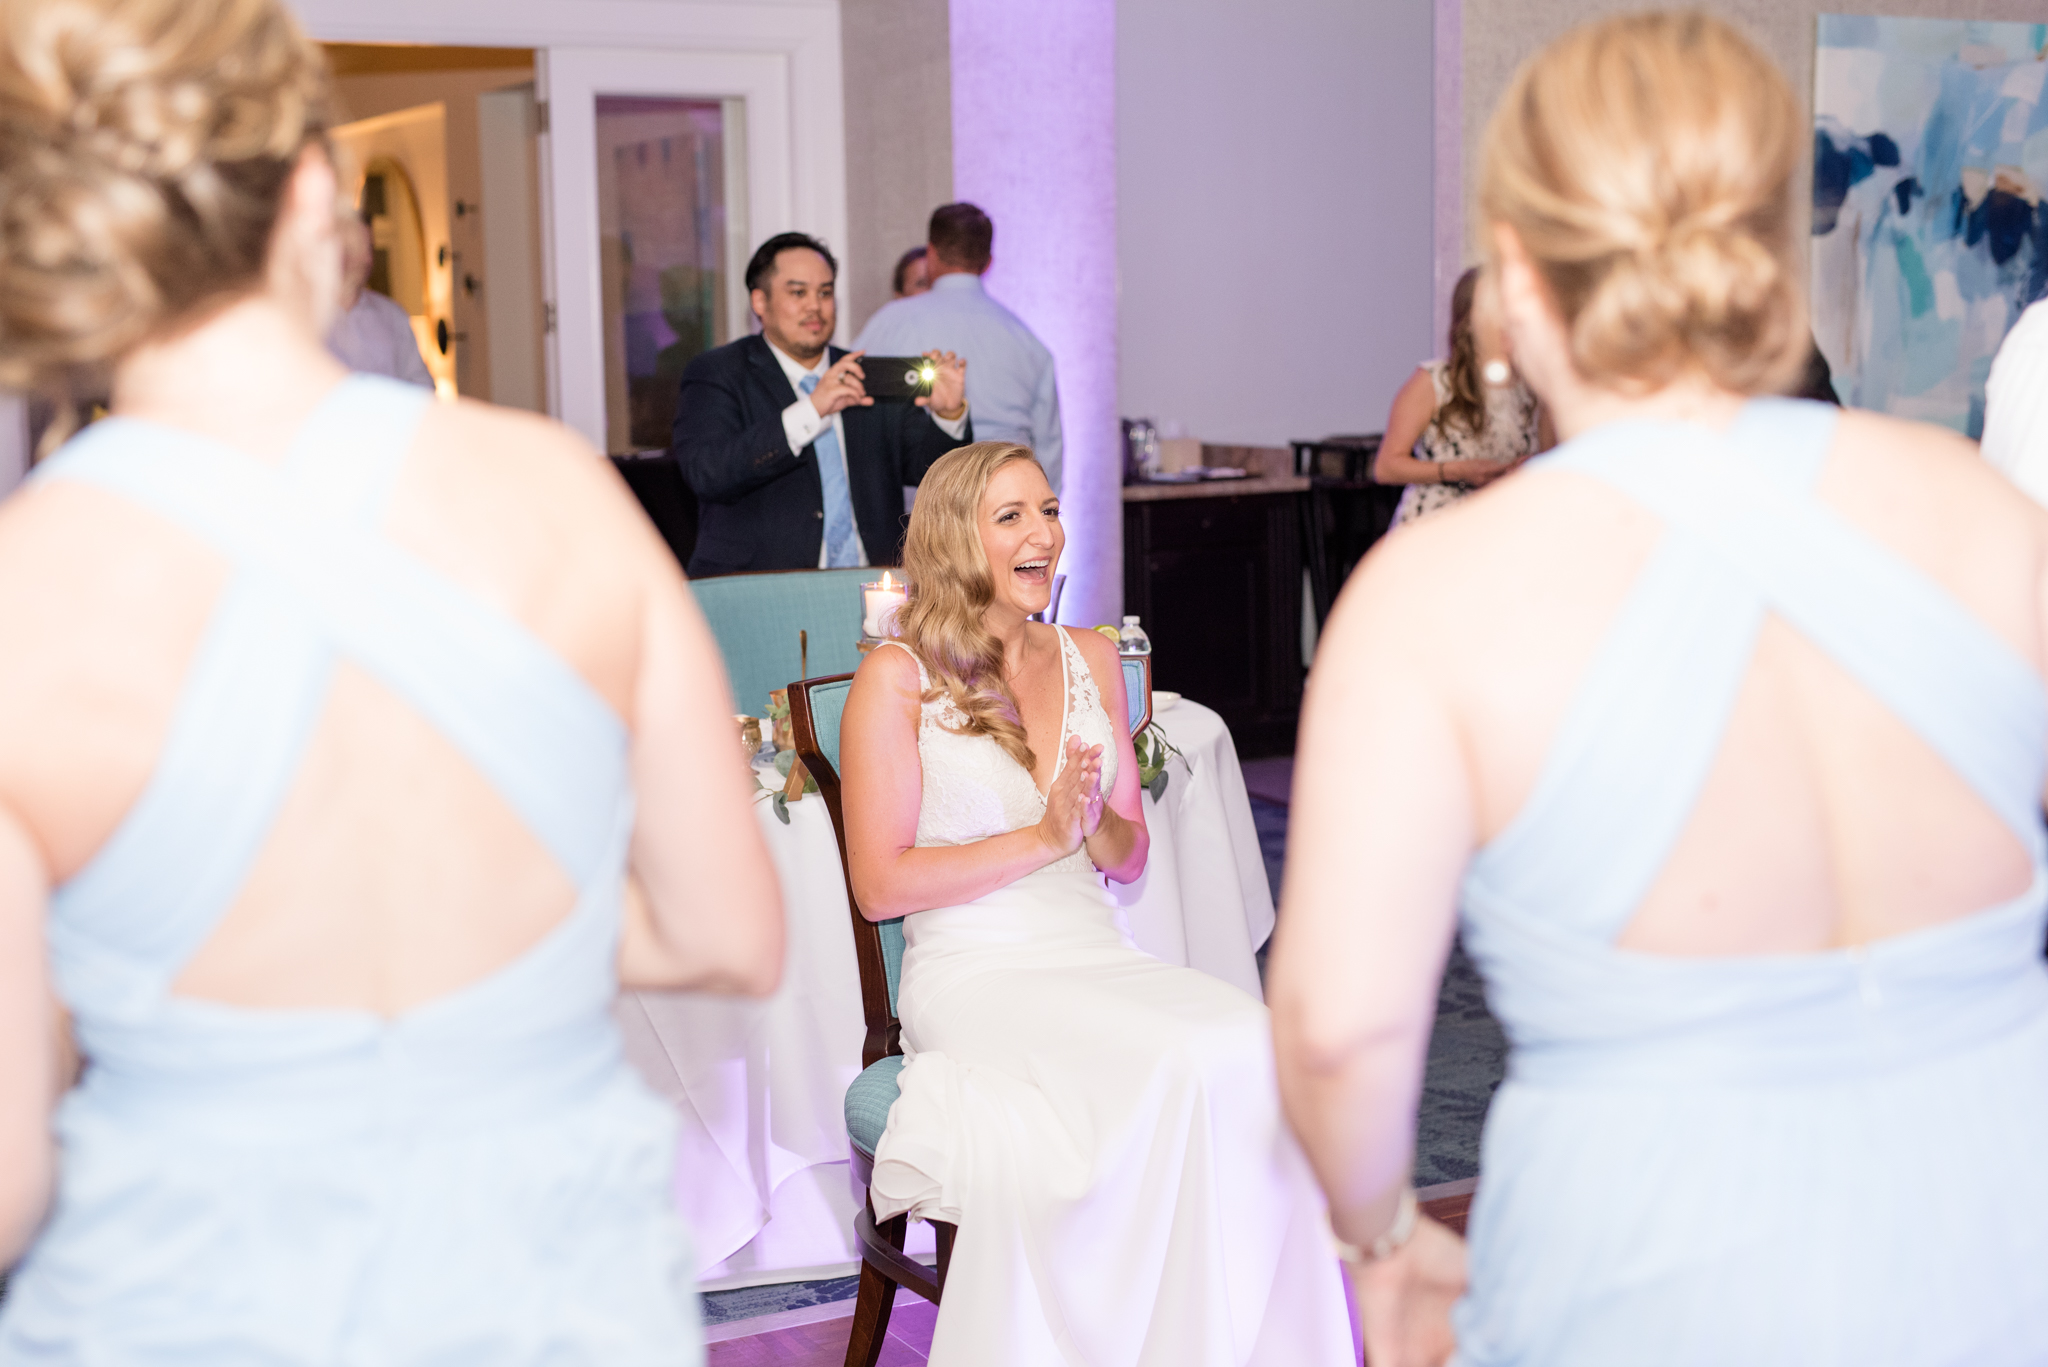 Bride laughs at choreographed dance.